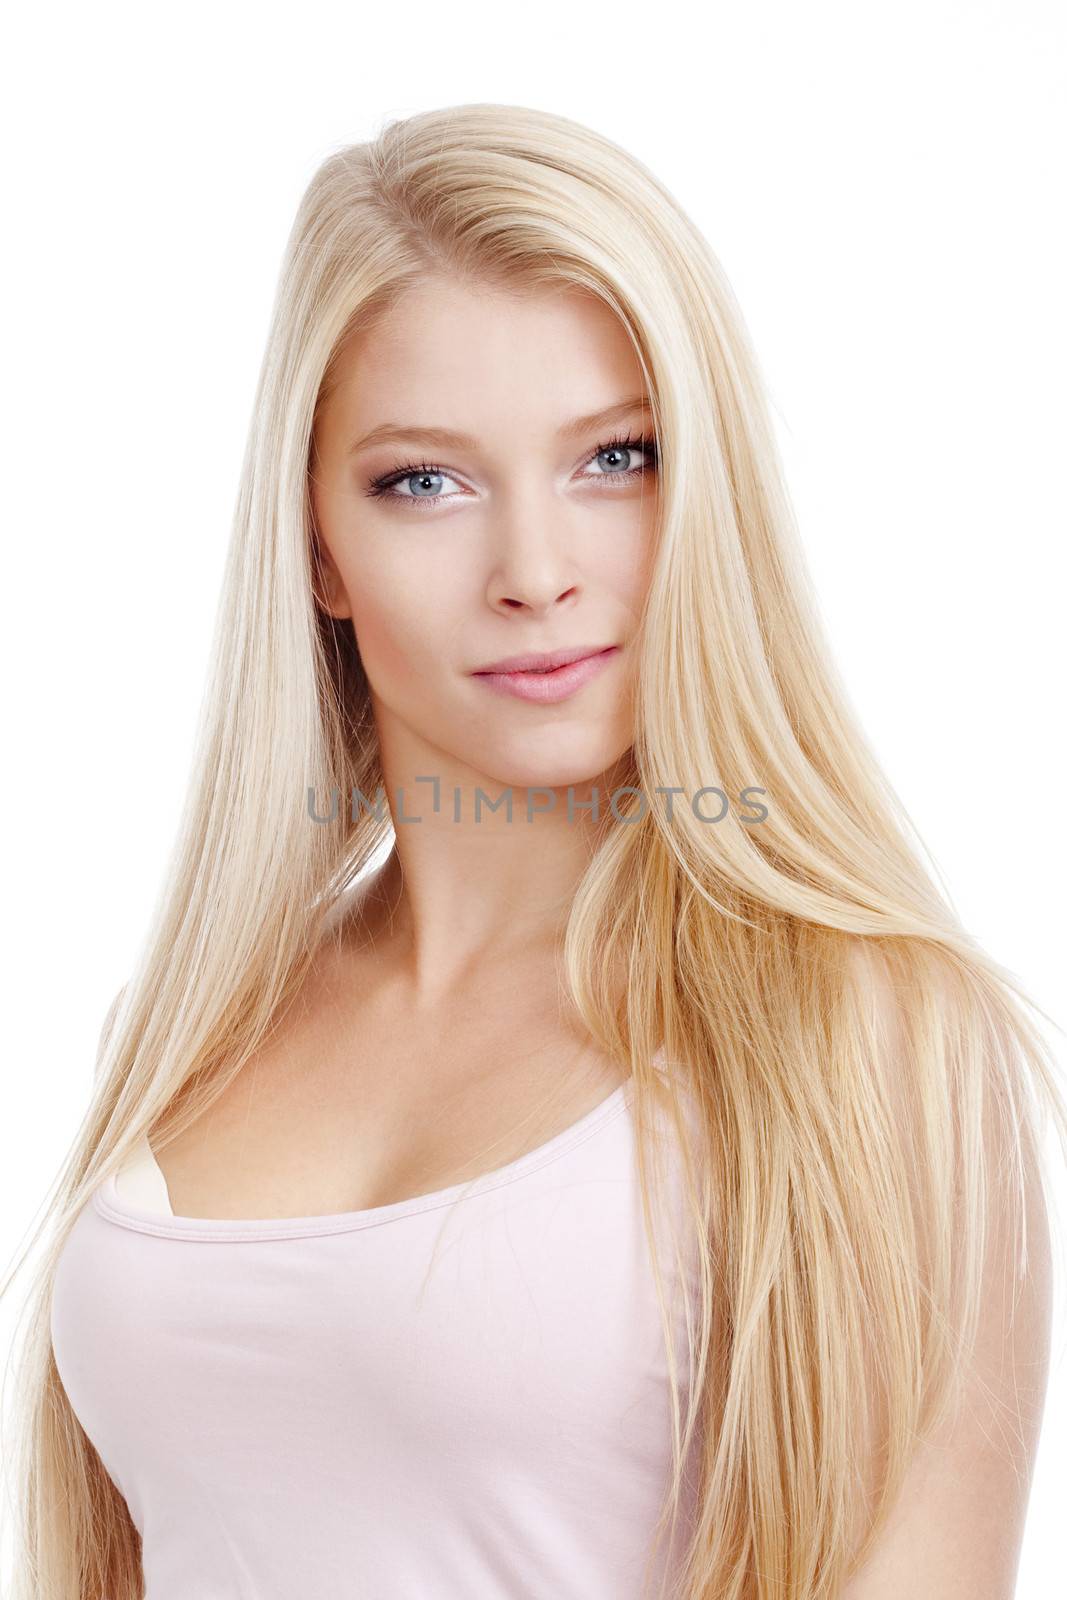 portrait of a young beautiful woman with blond hair - isolated on white